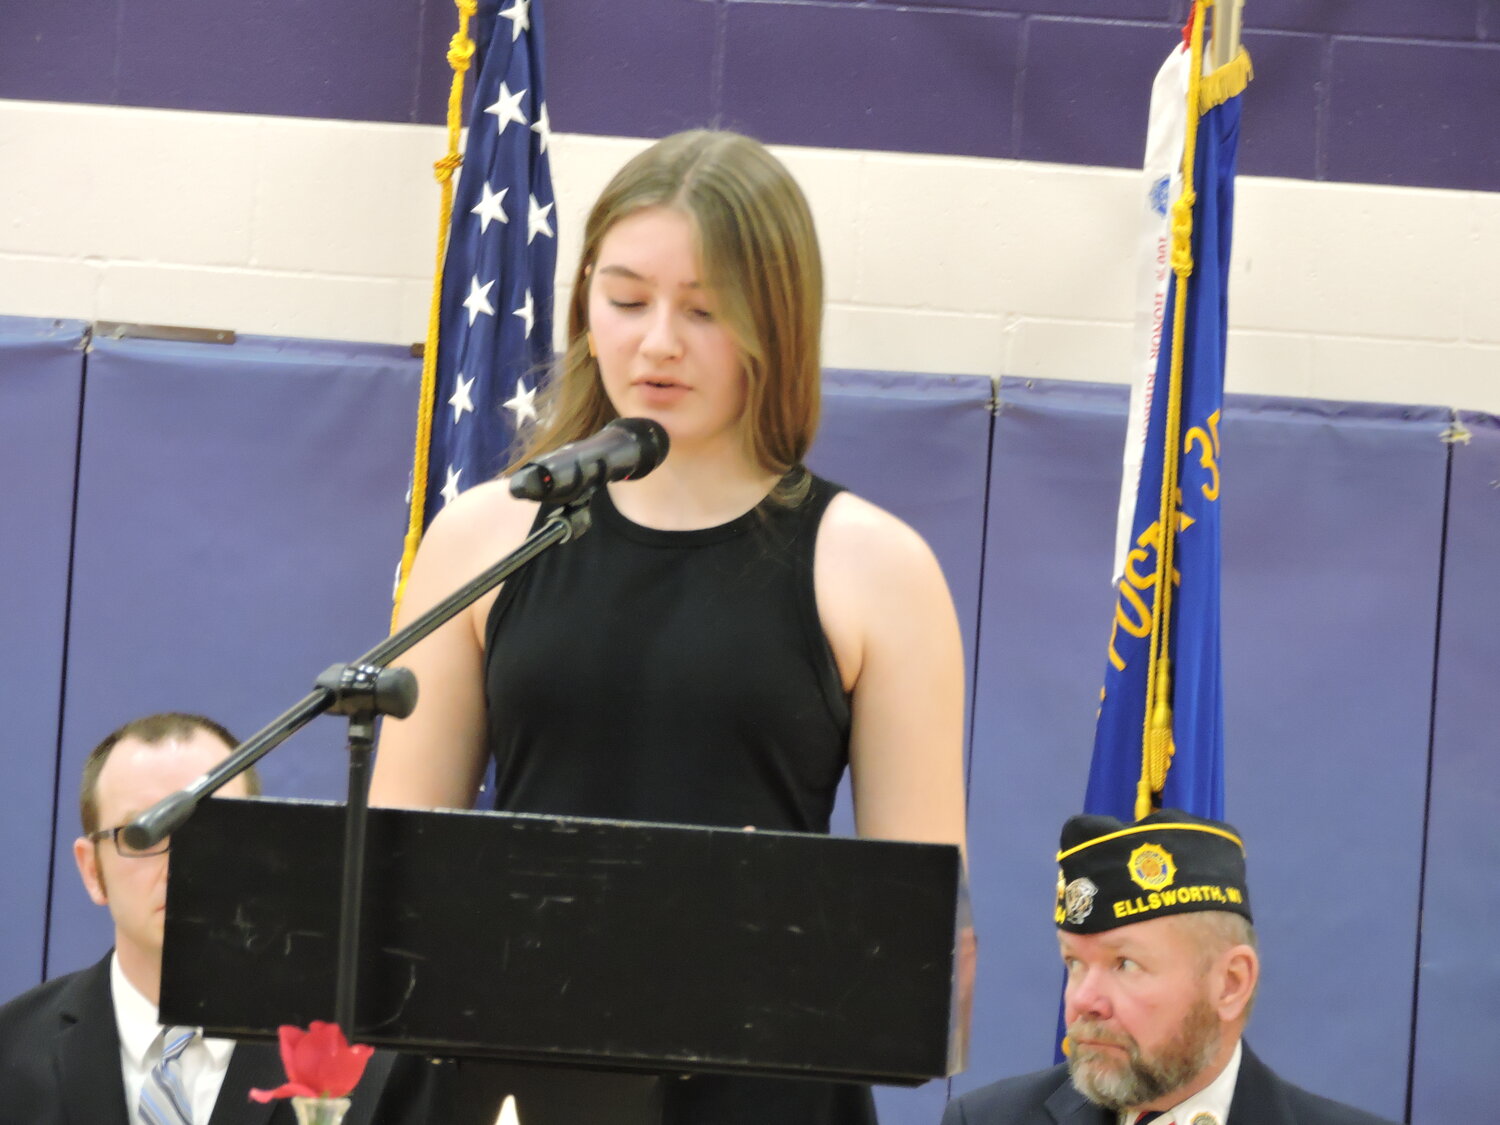 EMS eighth grader Sophia Place read a poem about the Quilt of Valor for the EMS Veterans Day program Nov. 10.